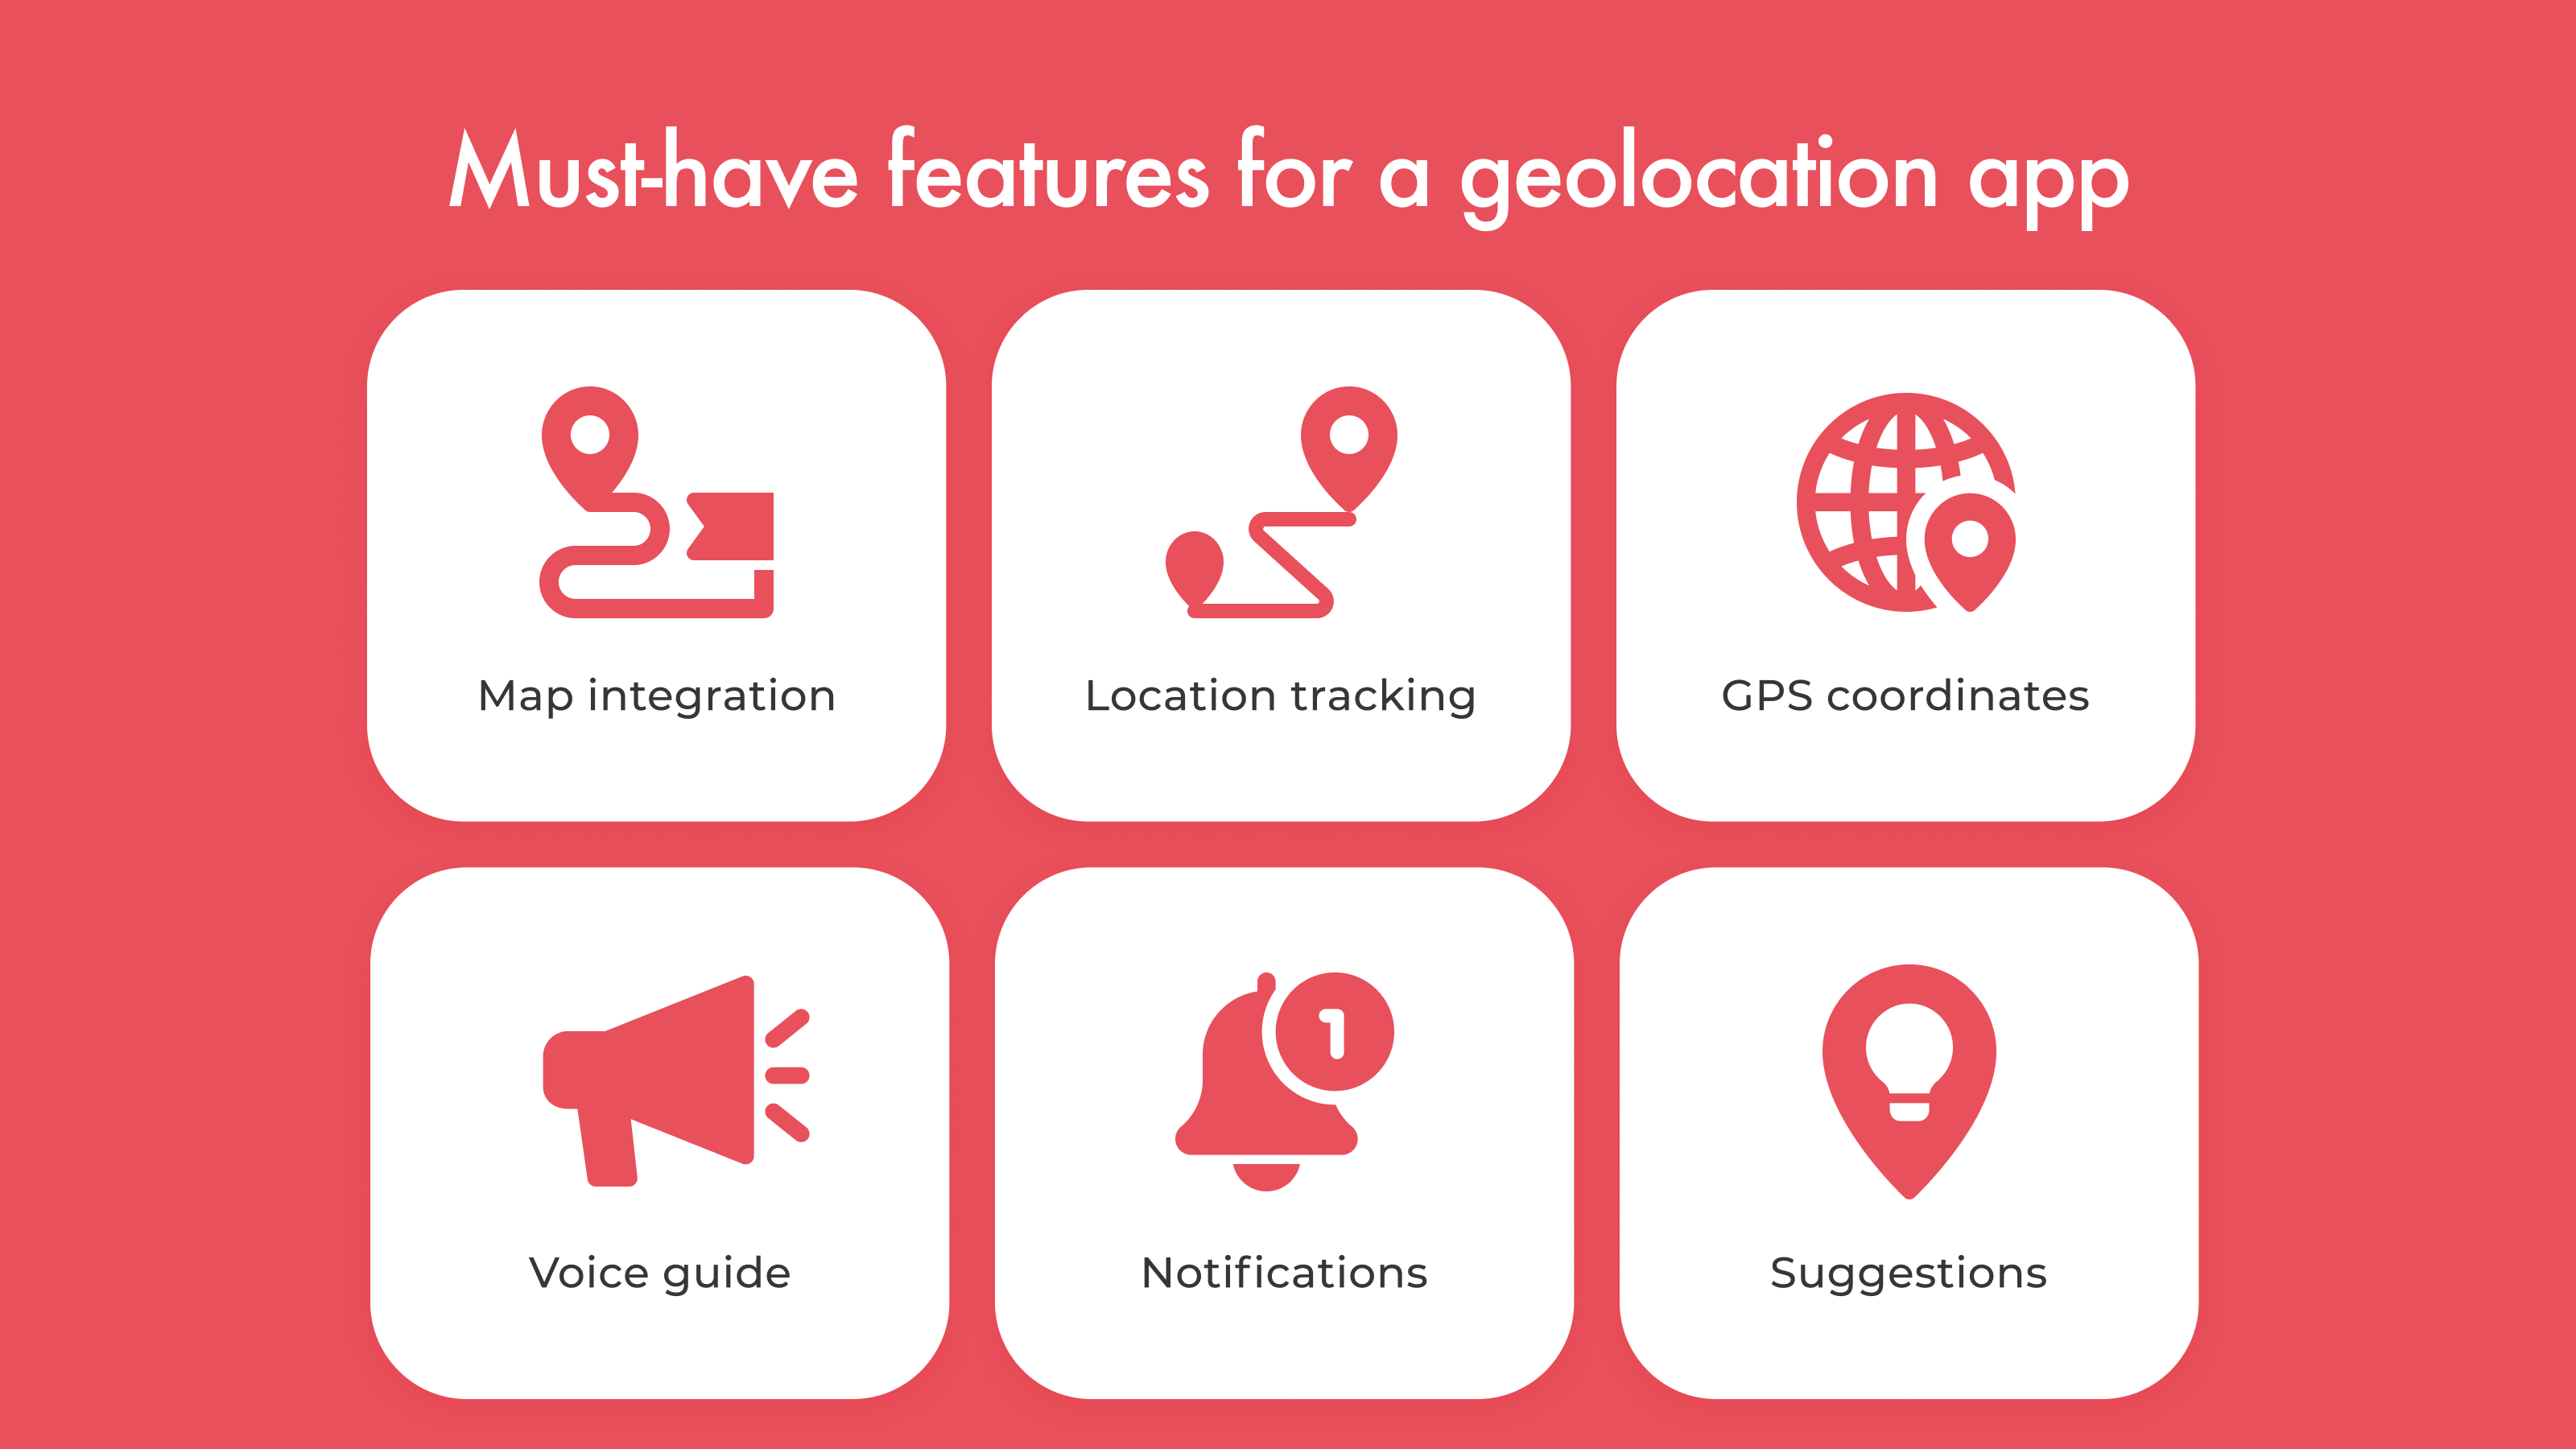 Features of Geolocation App